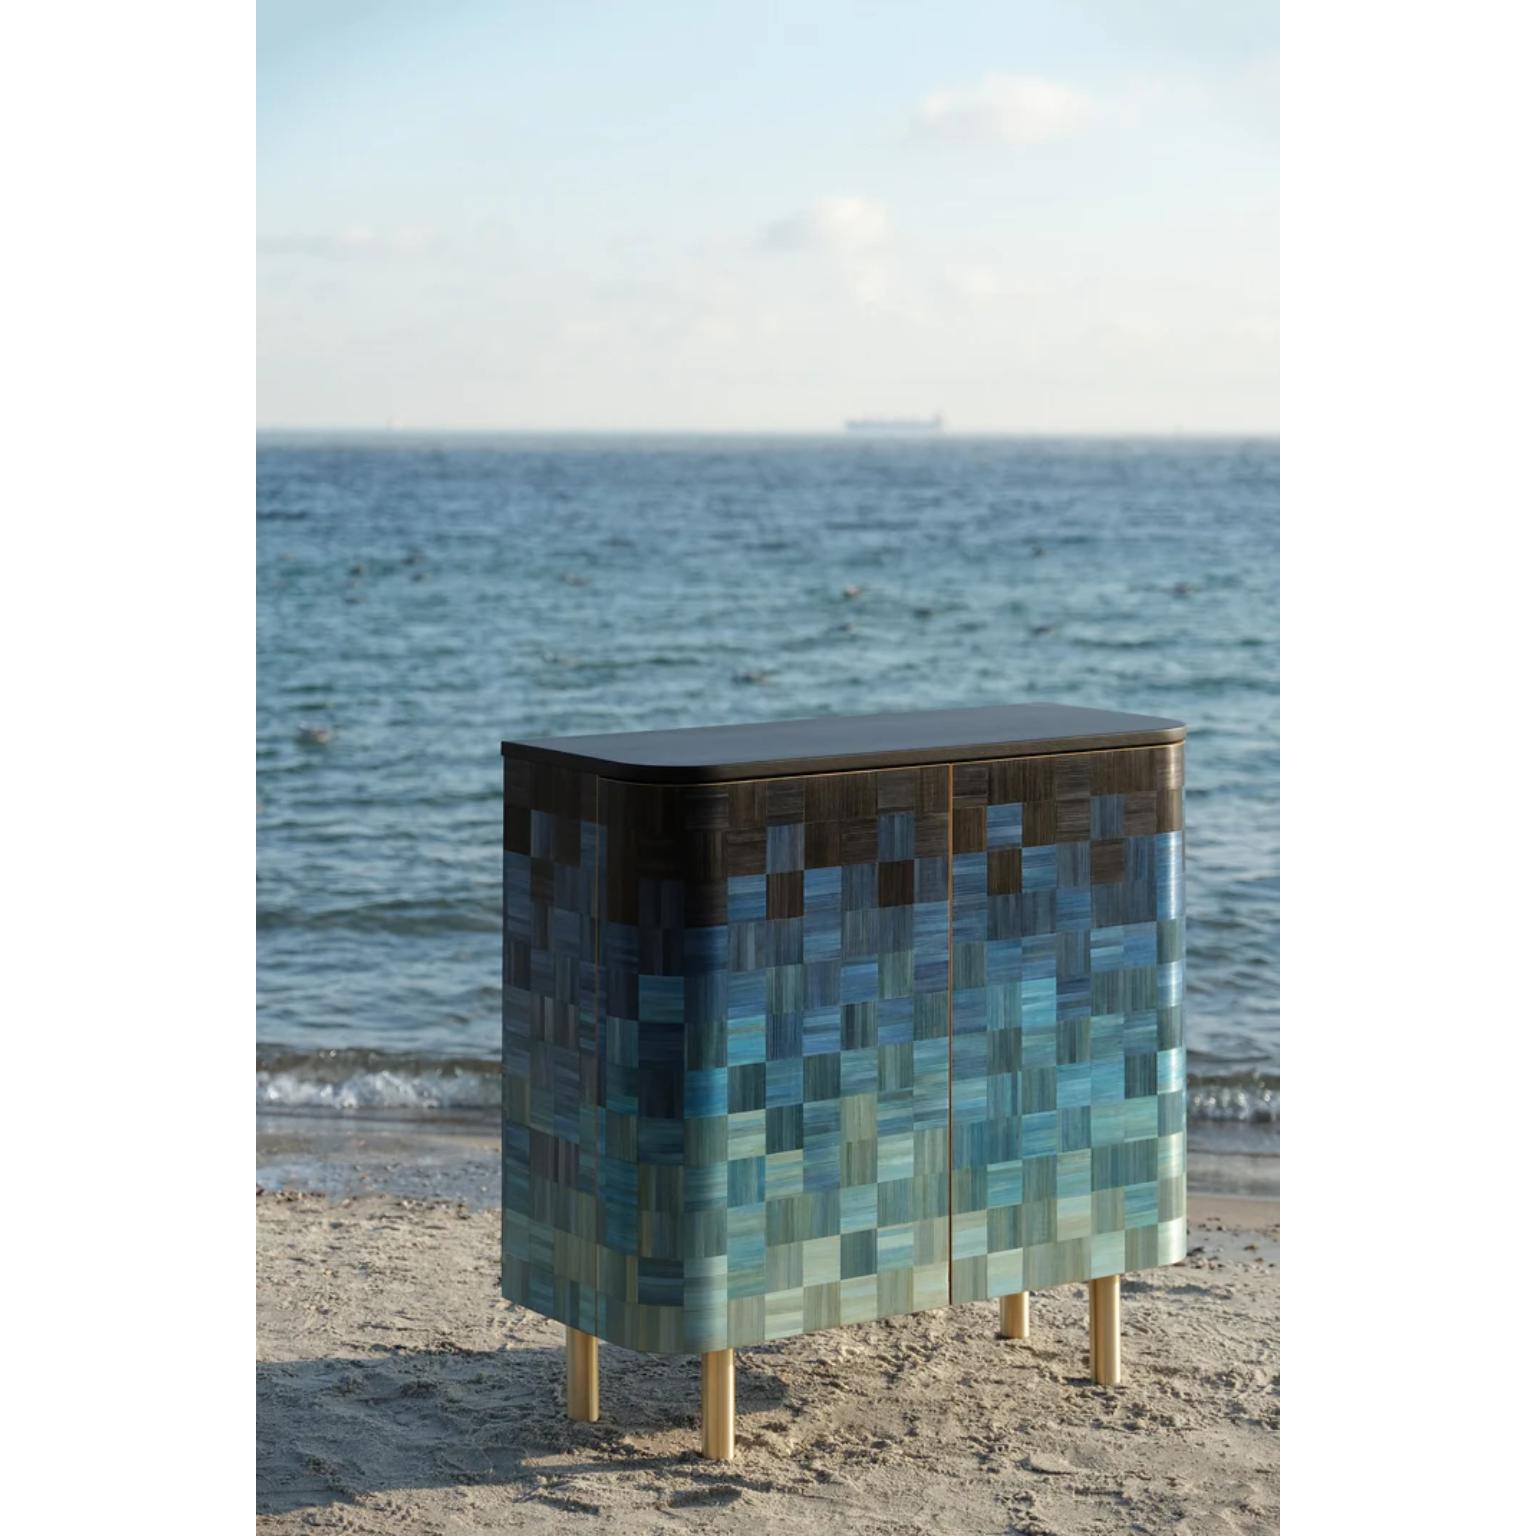 Black Sea Natūra Cabinet by Ruda Studio
Dimensions: D 45 x W 100 x H 100 cm.
Materials: Solid wood (ash), rye straw inlay, plywood and brass.
Weight: 70 kg.

Dimensions are customizable. Please contact us. 

Experience elegance with the newest